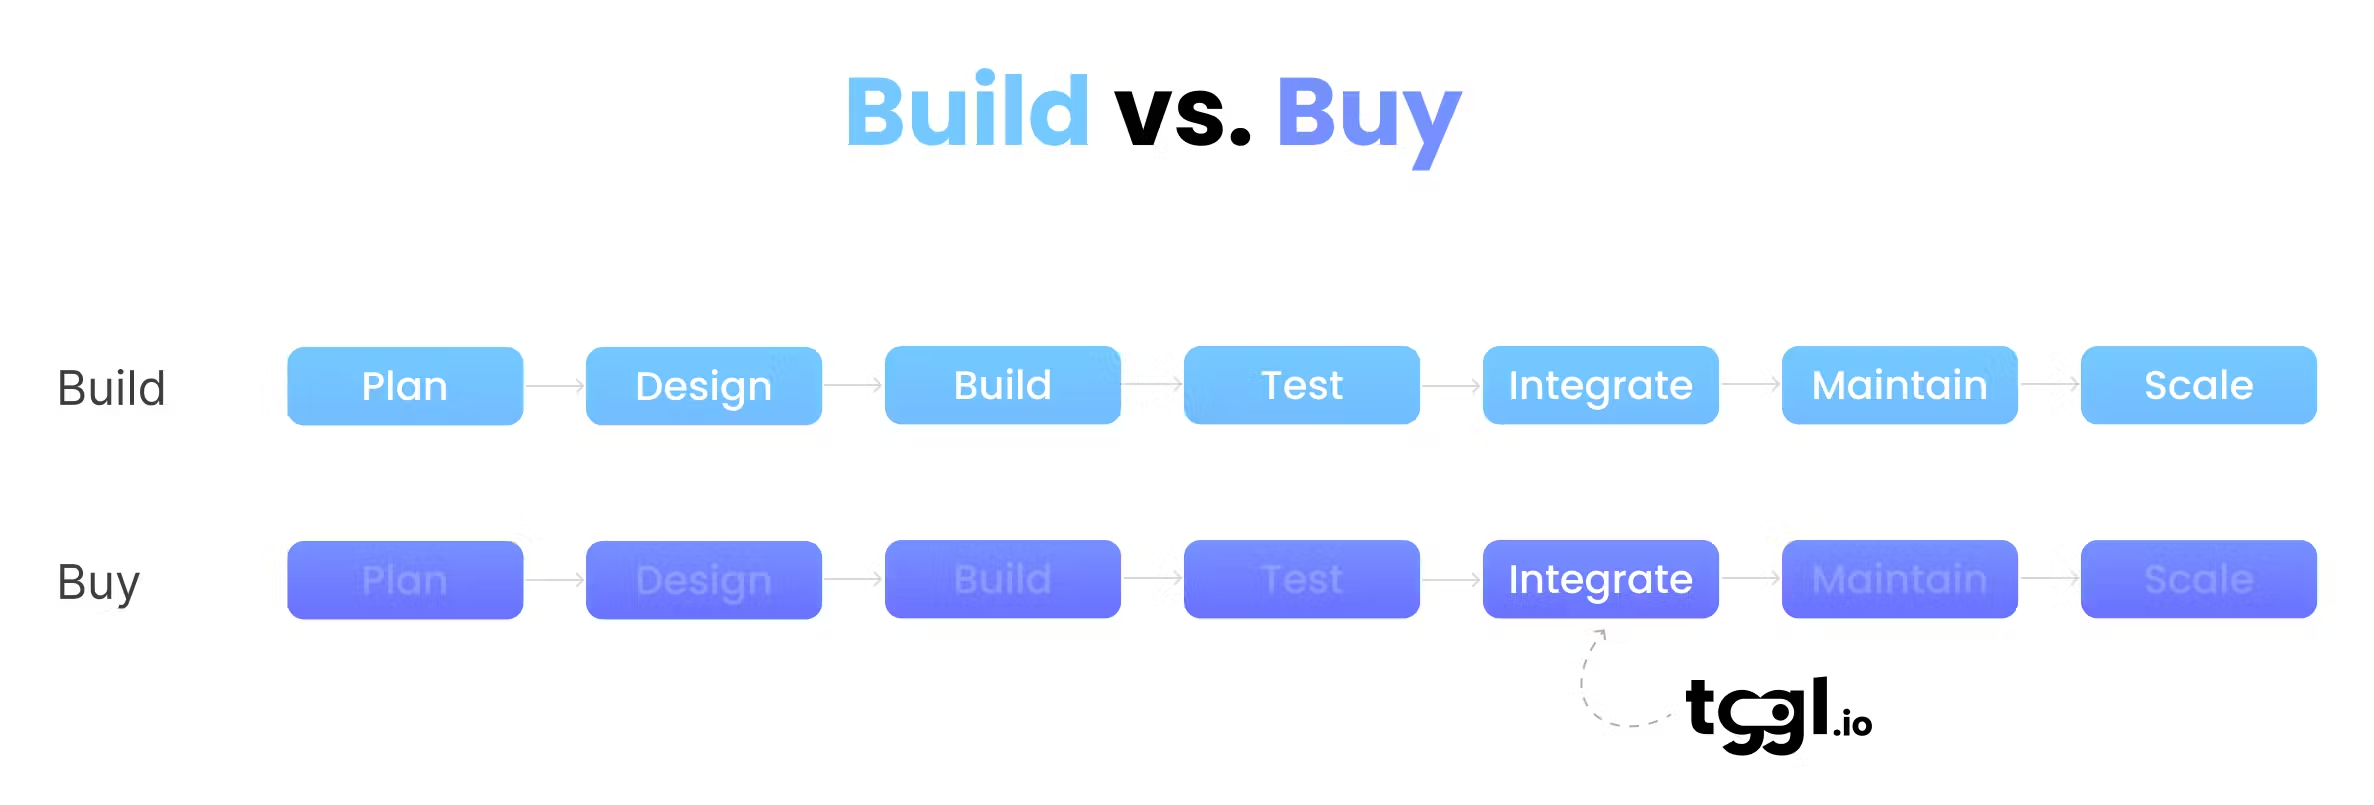 Build vs buy ease of use